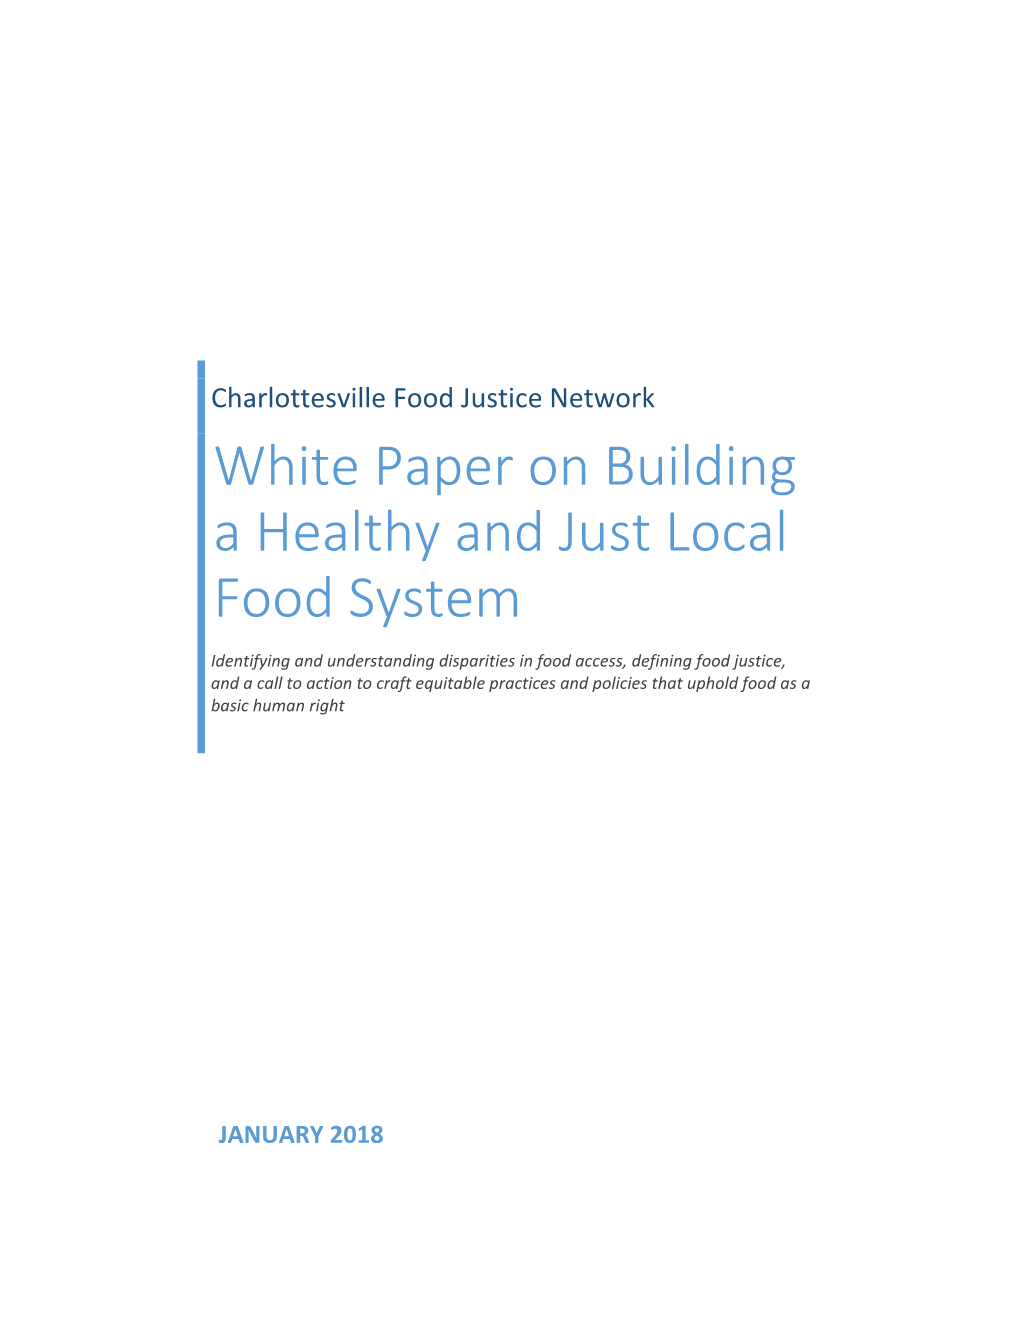 White Paper on Building a Healthy and Just Local Food System